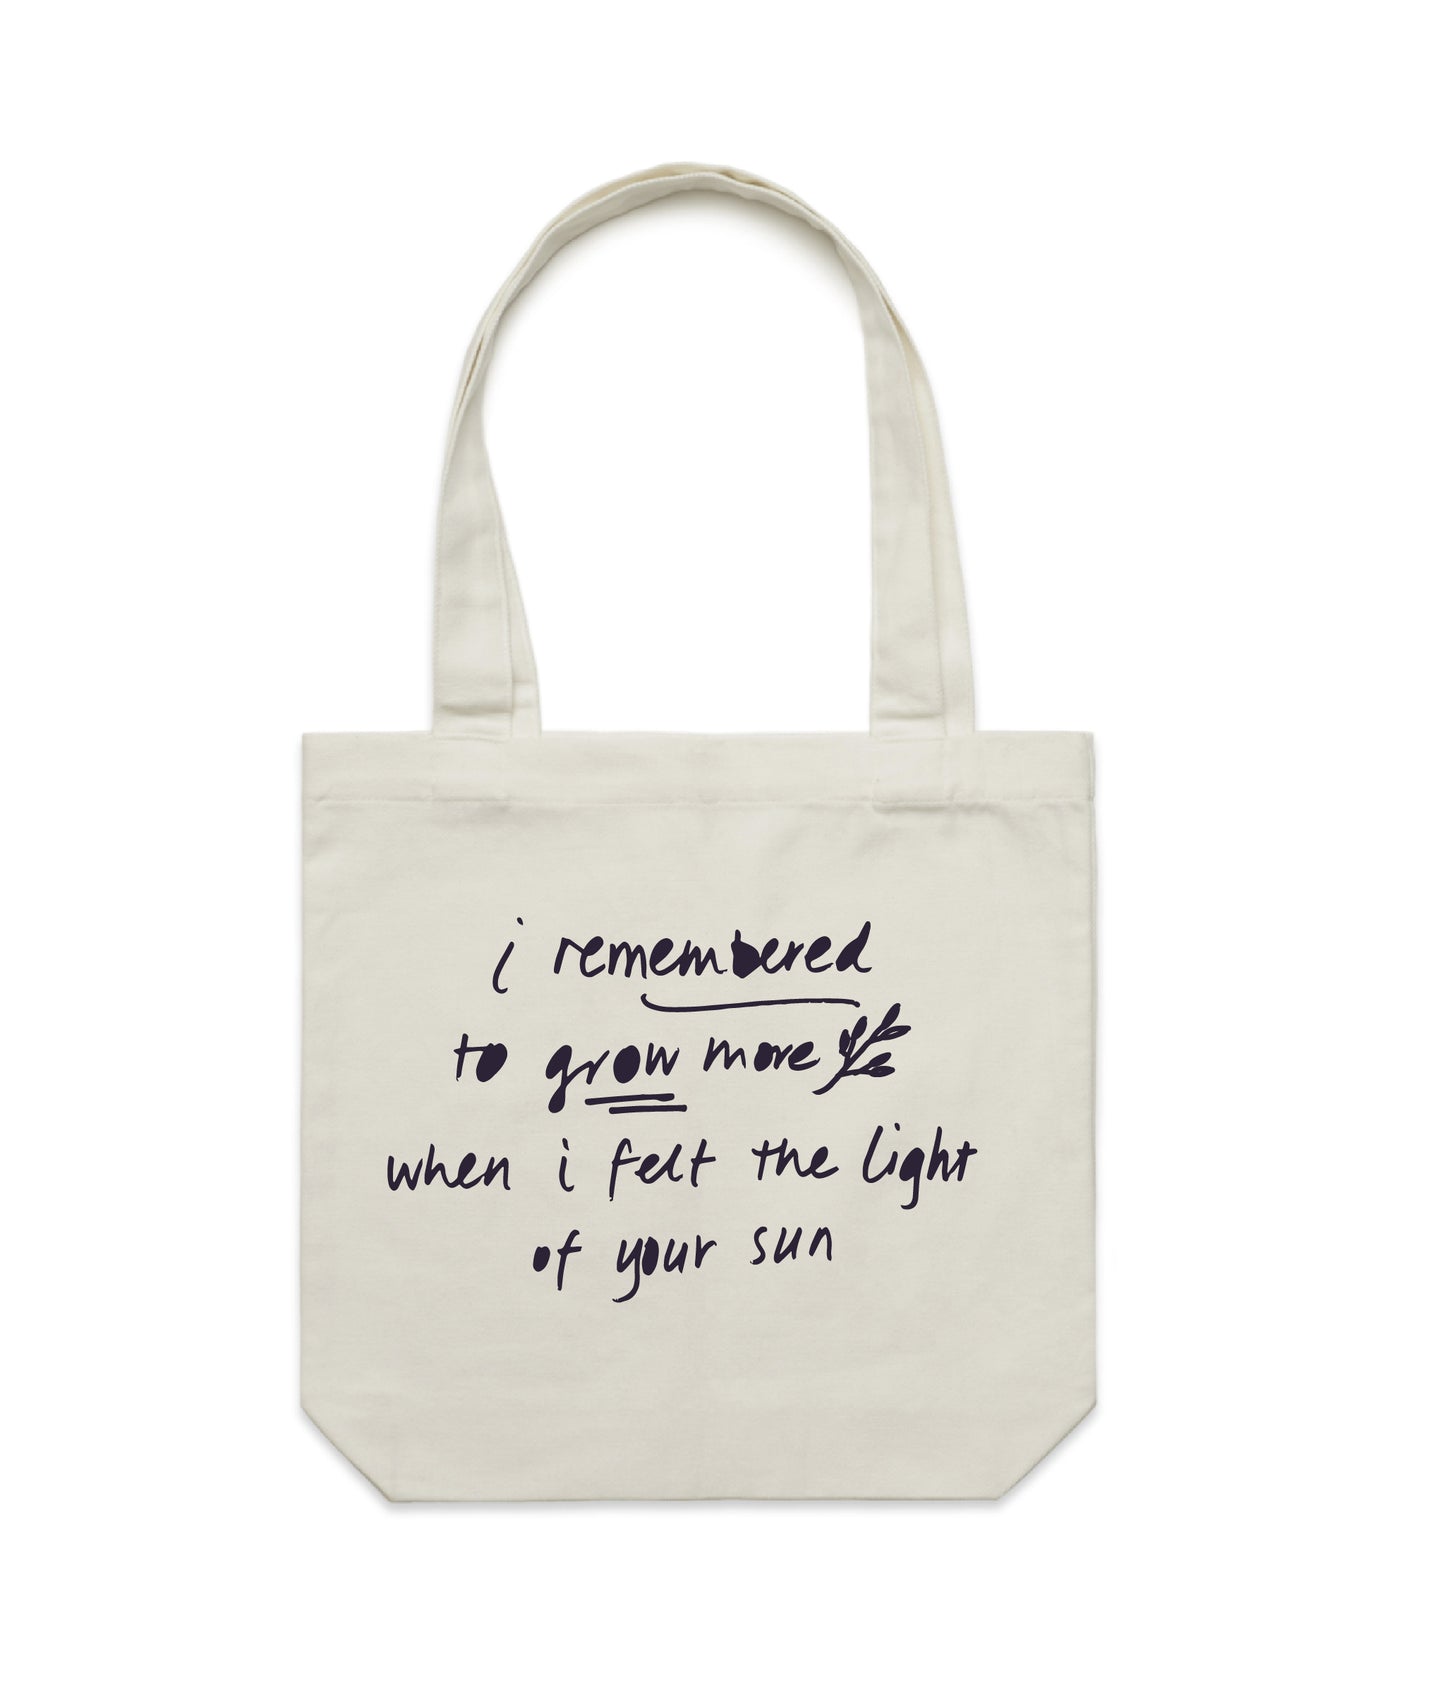 Kav Temperley tote Flat lay of cream tote bag reading 'I remembered to grow more when I felt the light of your sun' in ink navy